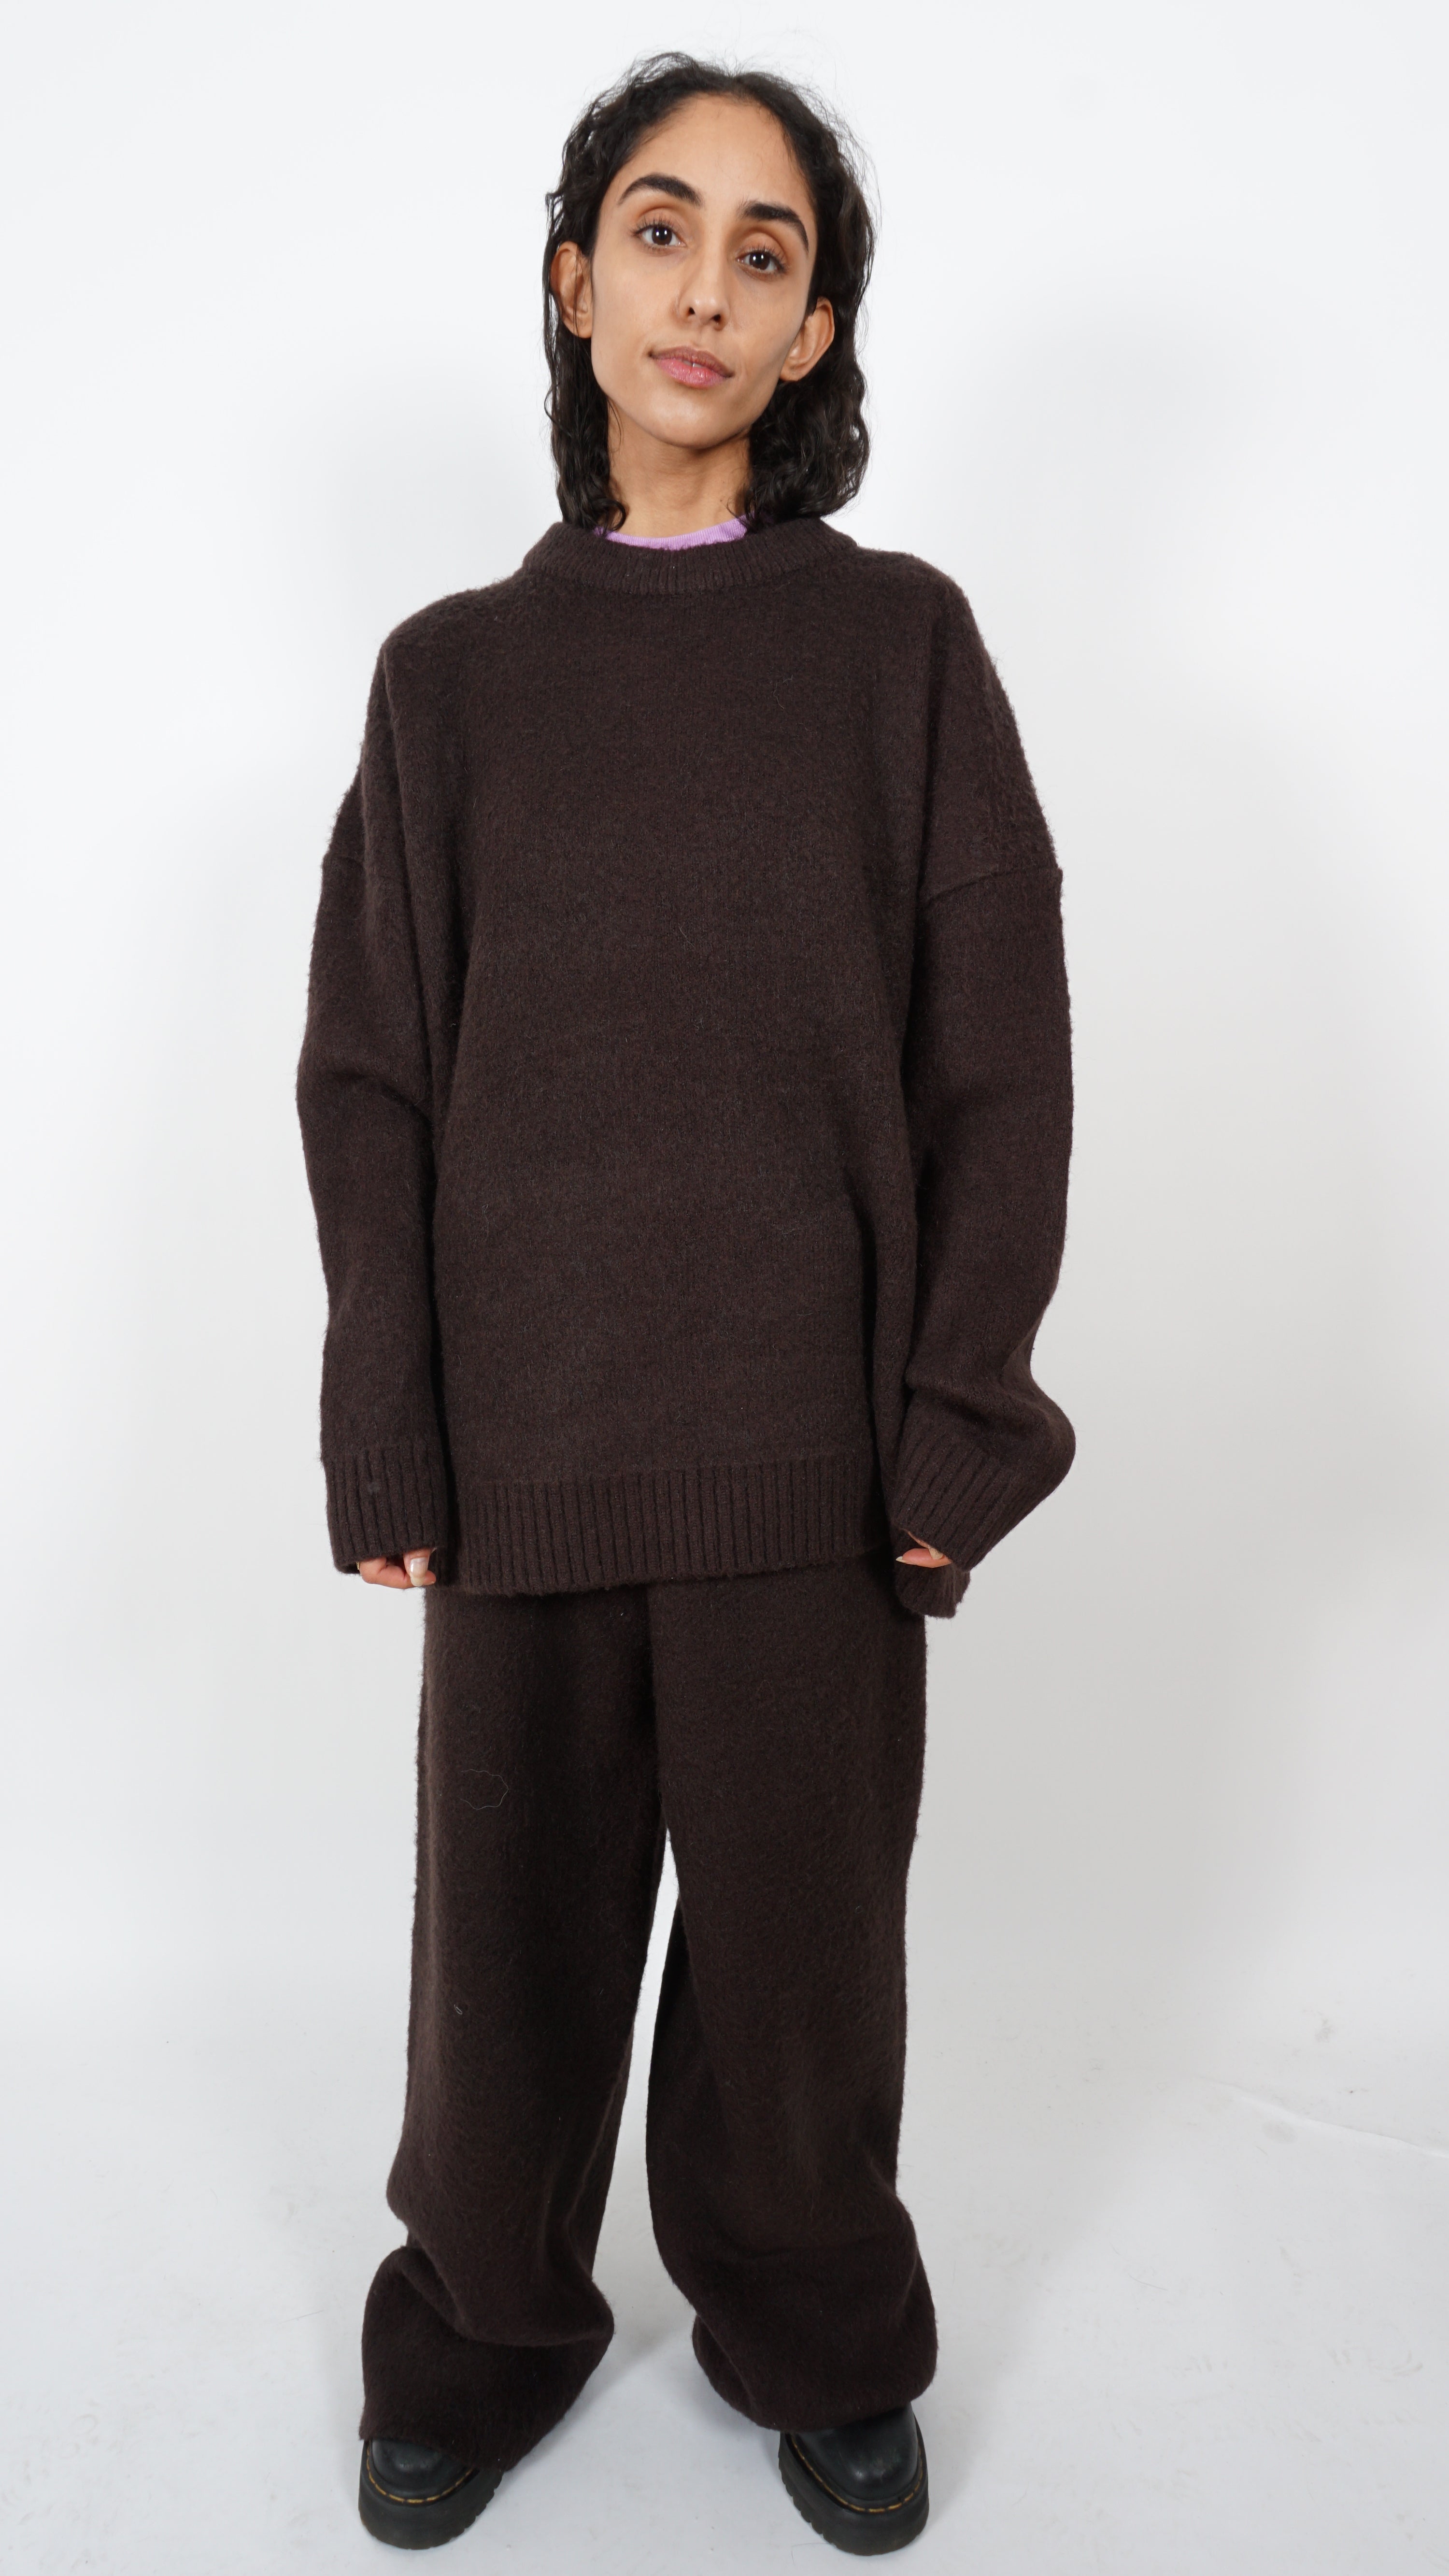 Brushed knit trouser by Birrot